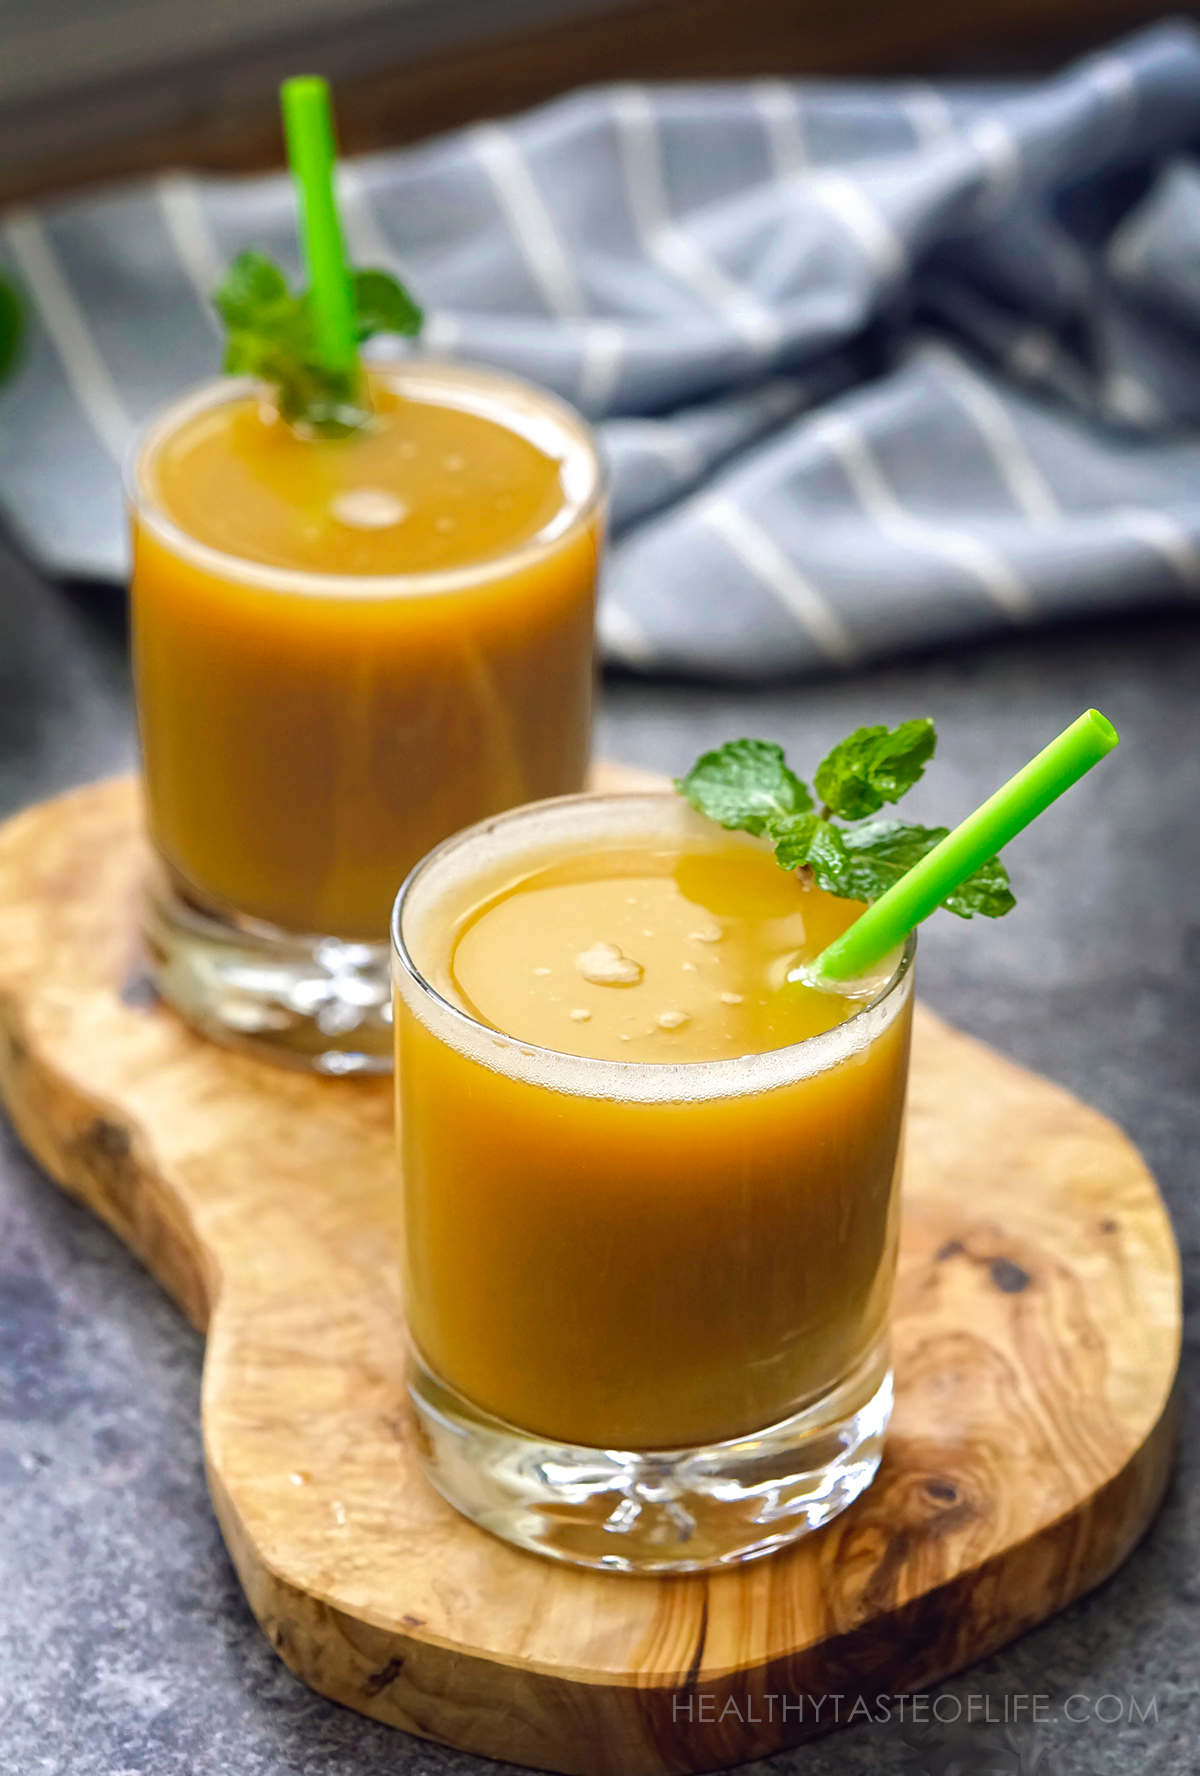 Cabbage juice recipe for ulcers which consists of green cabbage, celery, carrot apple and mint leaves.